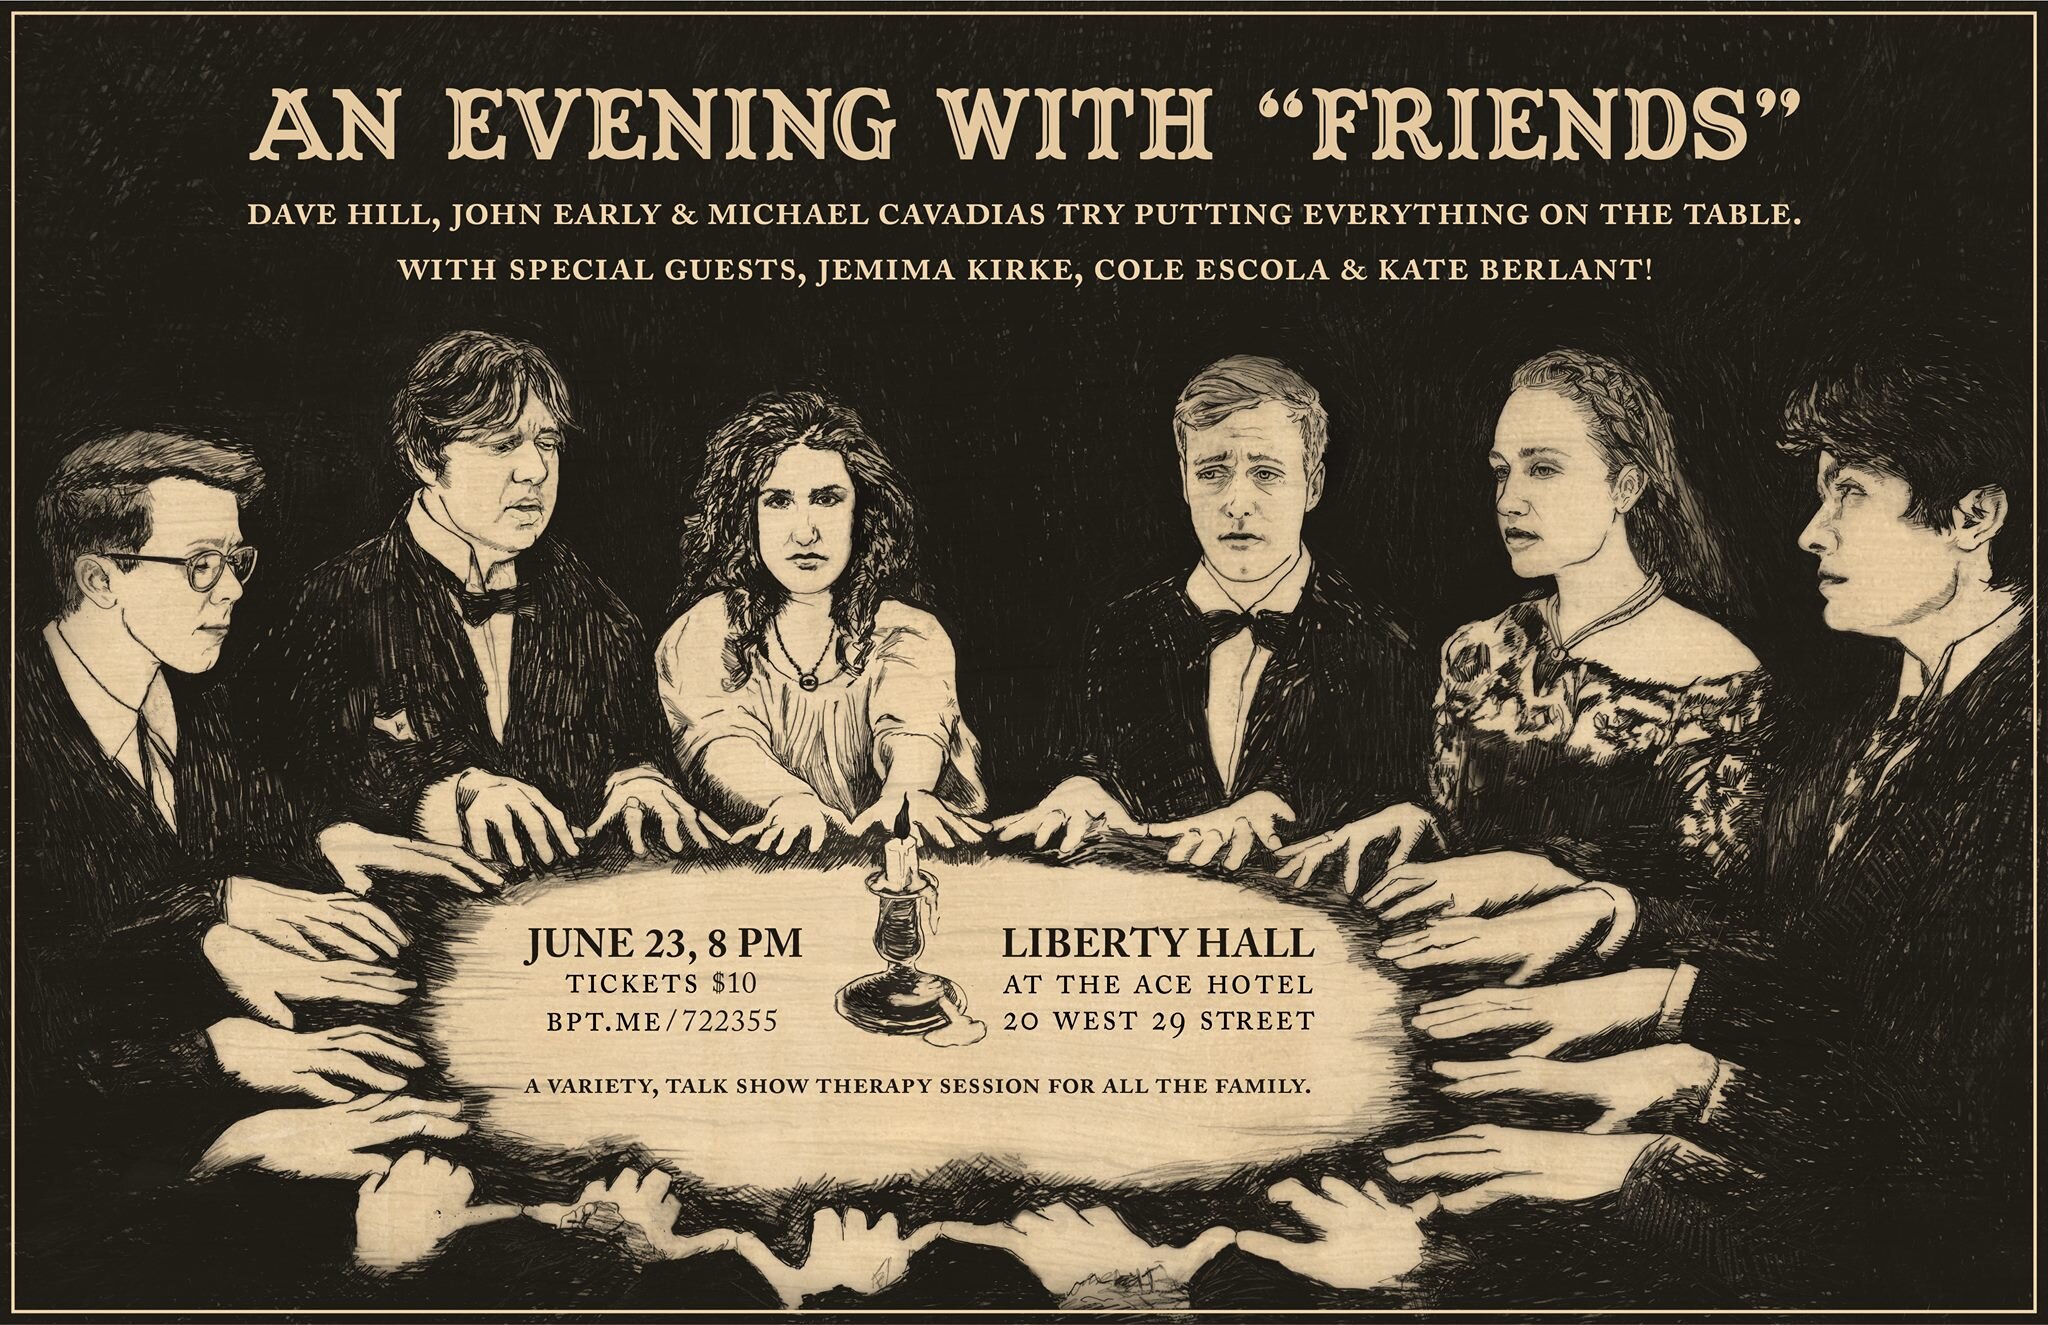 An Evening With "Friends" show poster